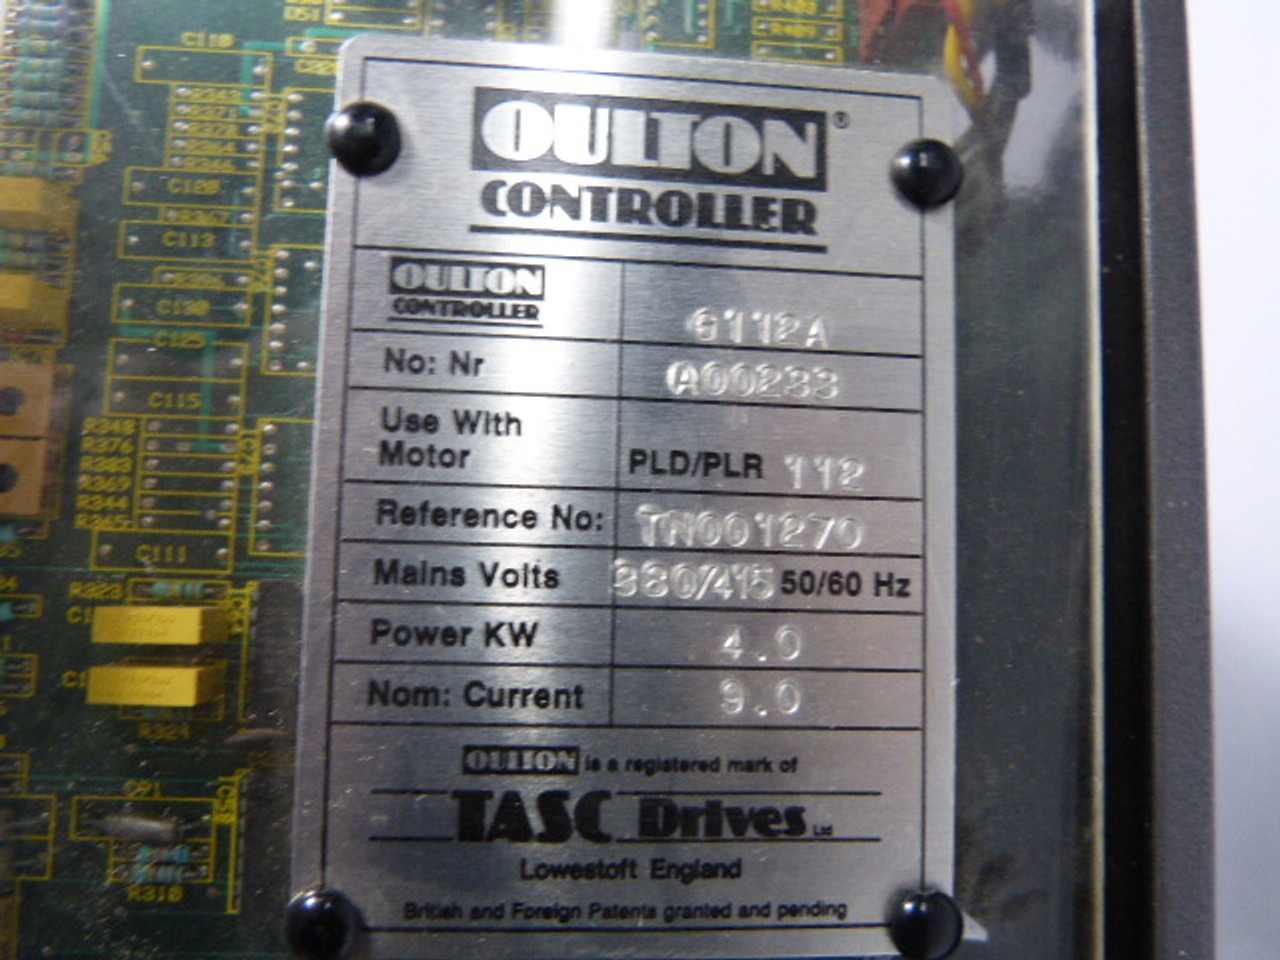 Tasc Drives G112A Oulton Frequency Control Drive 380/415V 50/60Hz  ! AS IS !